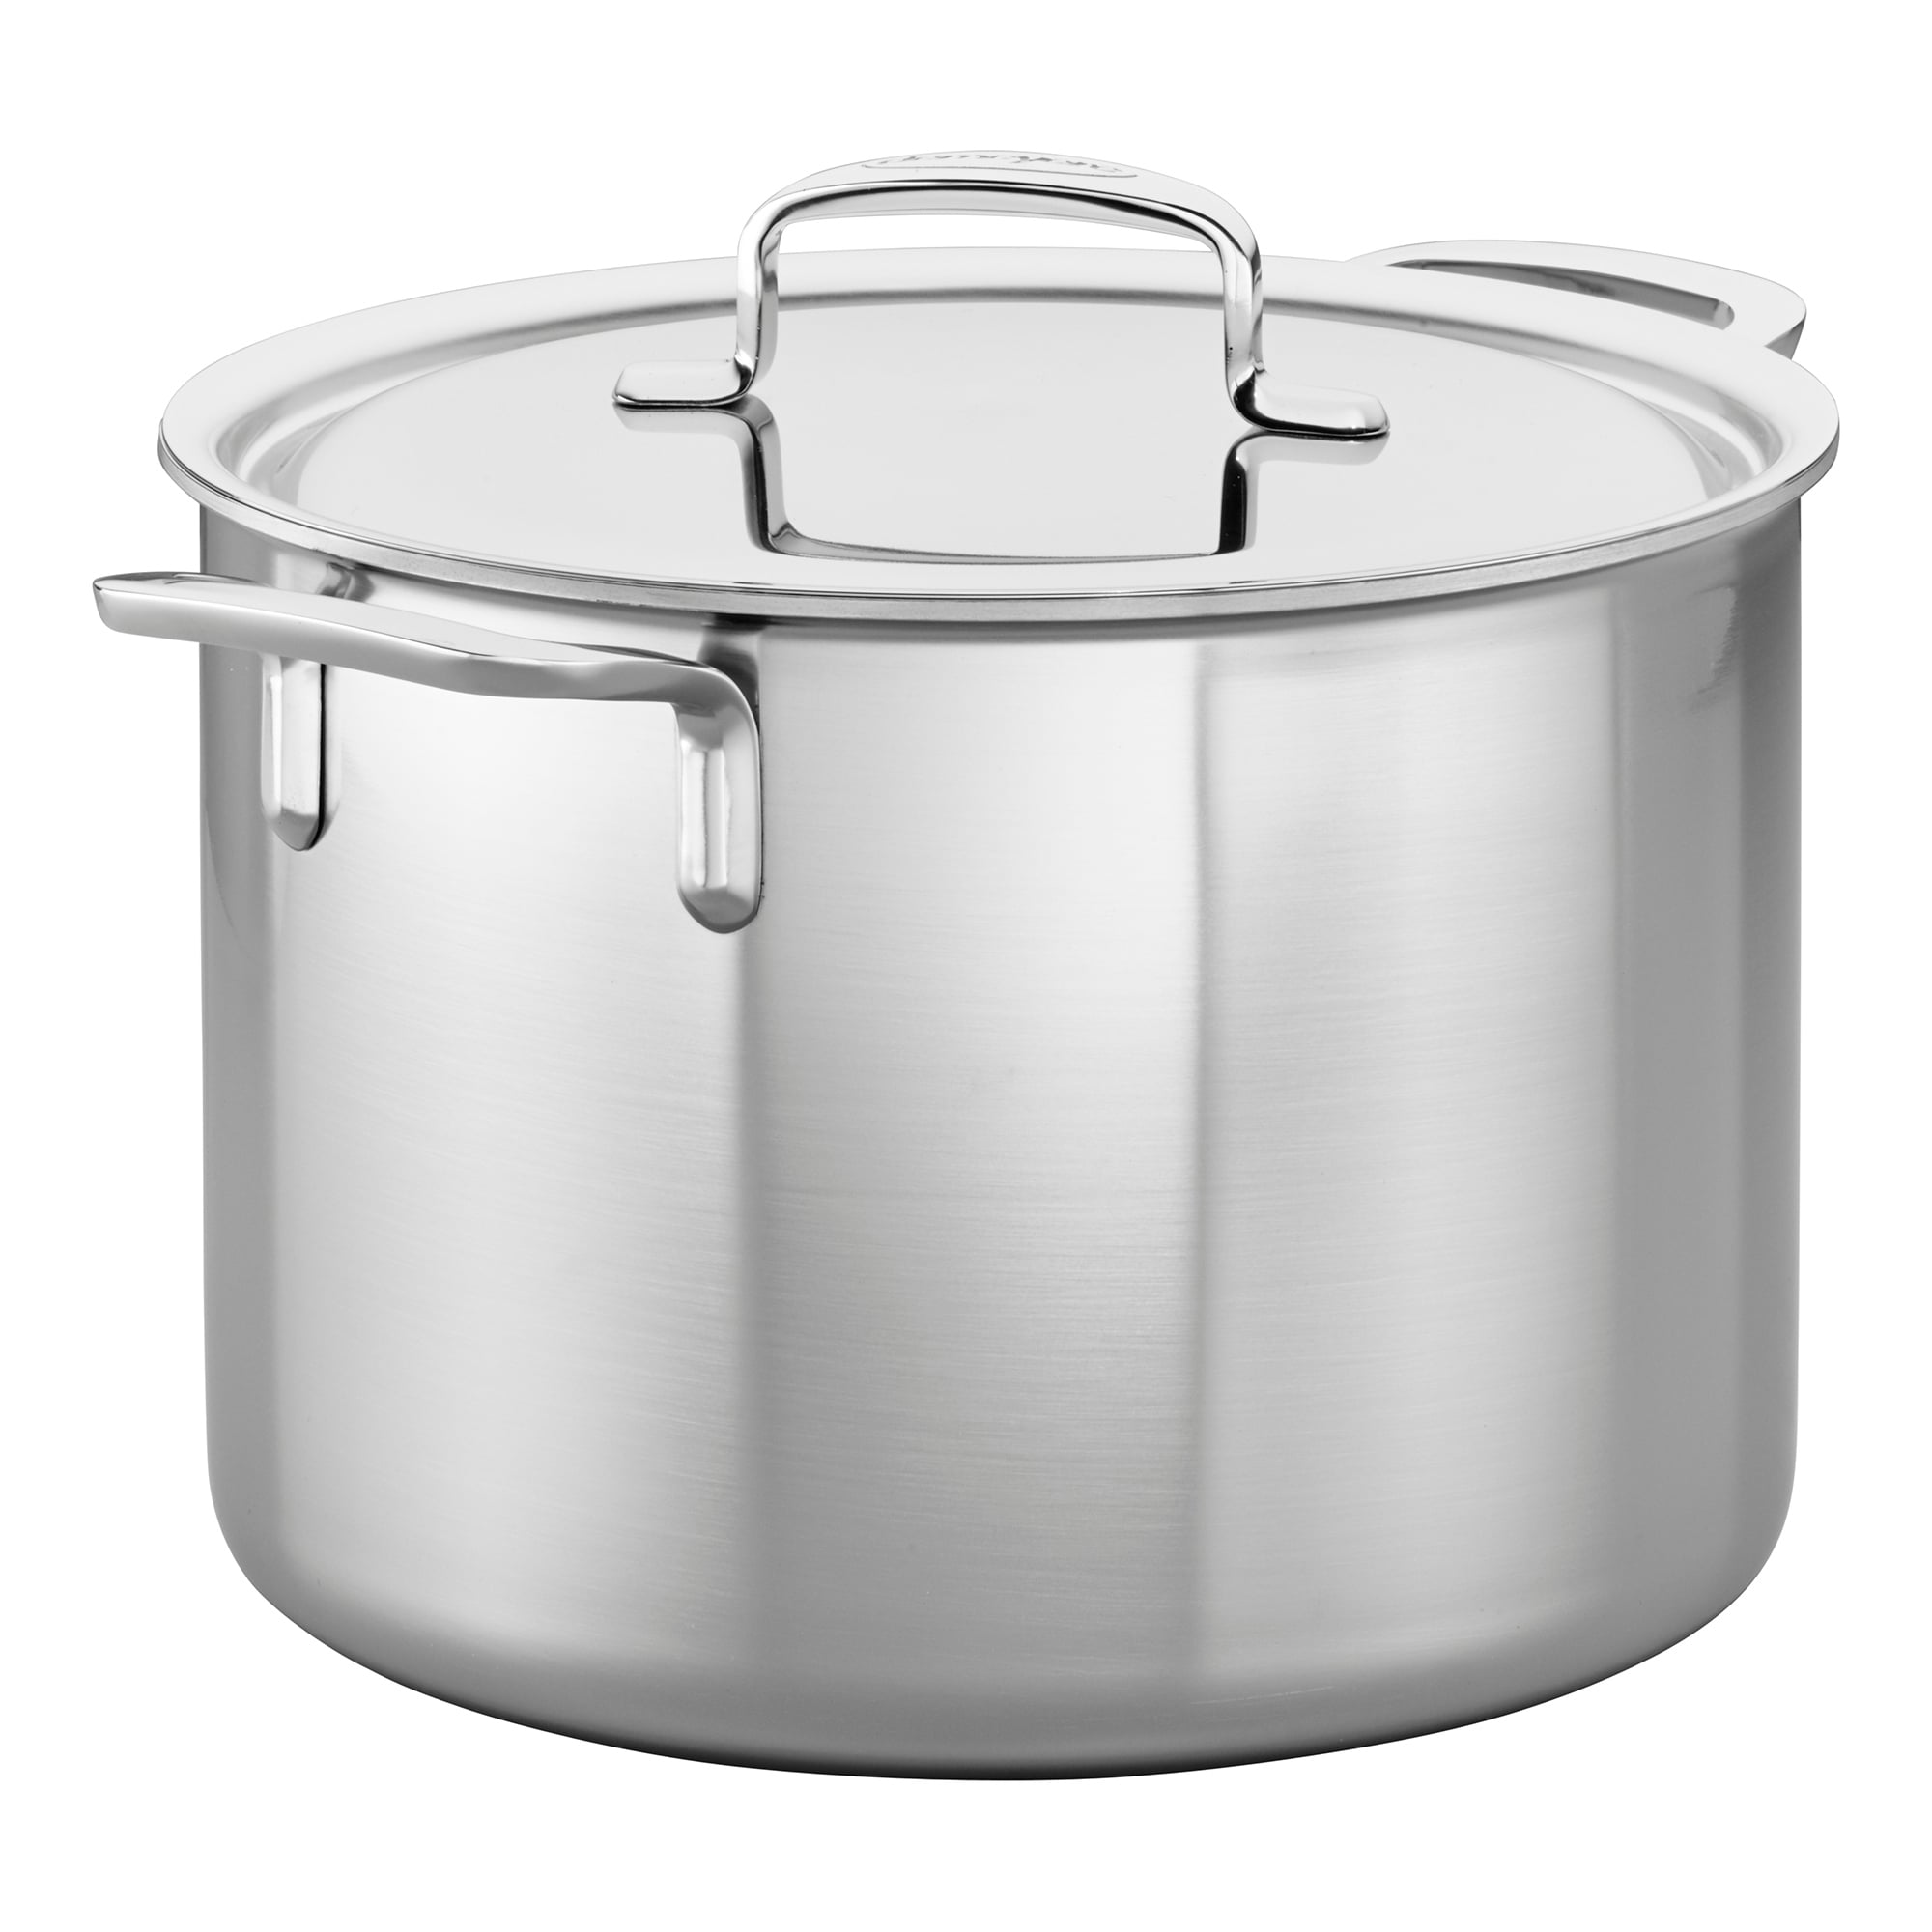 https://ak1.ostkcdn.com/images/products/is/images/direct/7a198725db751142fe87cf573d68bd4dd12c6b96/Demeyere-5-Plus-Stainless-Steel-8-qt-Stock-Pot.jpg